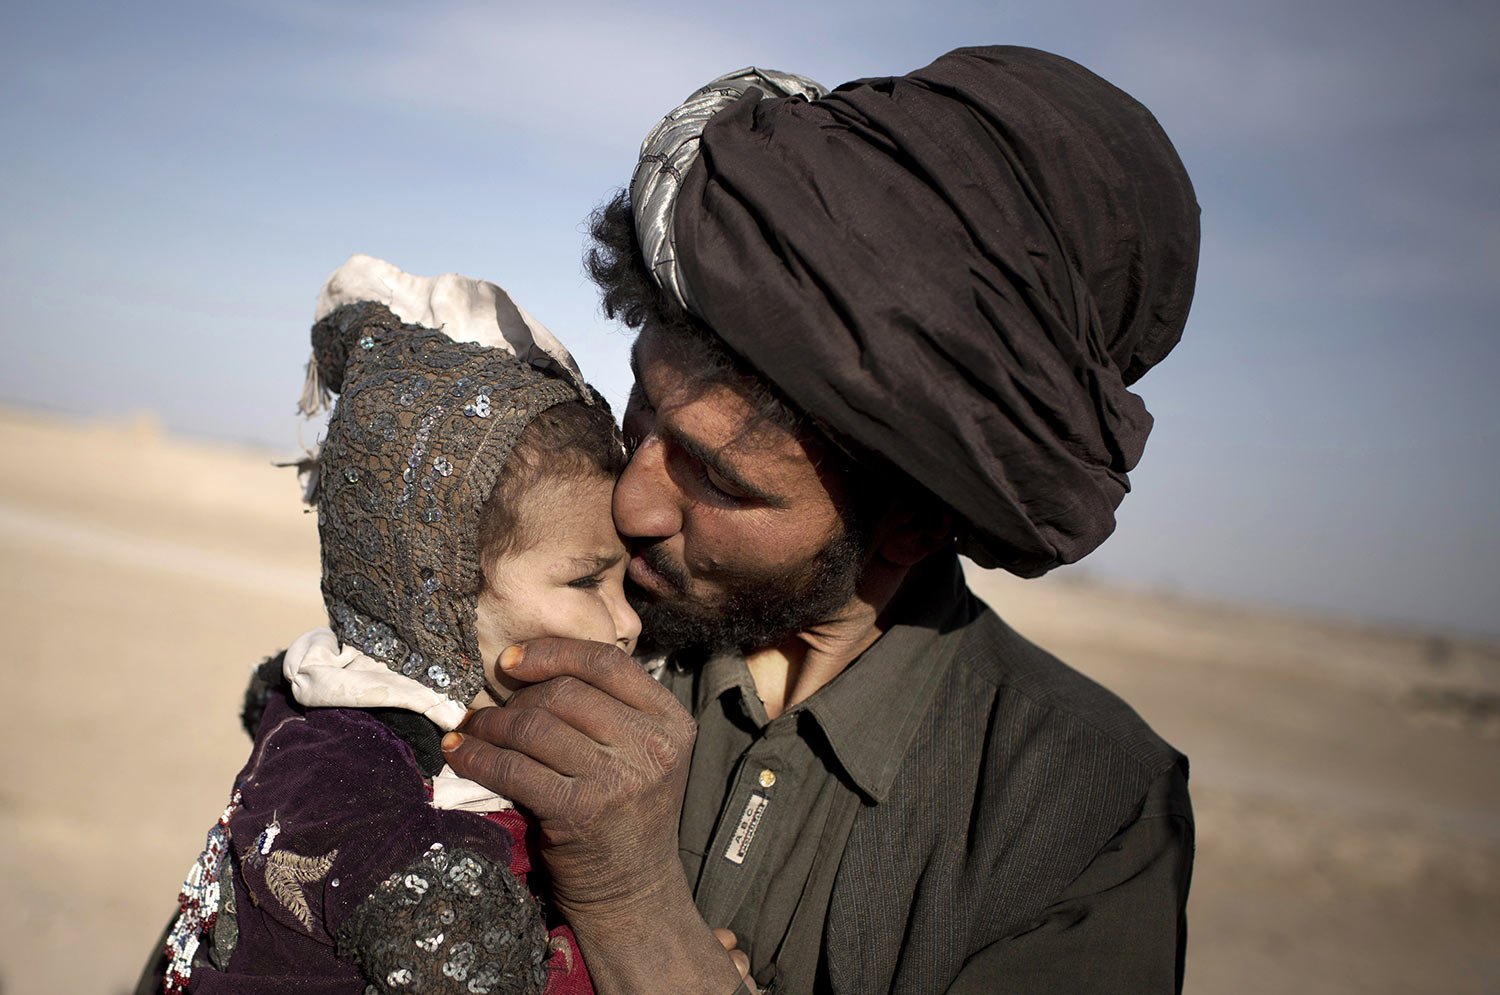  A nomad kisses his young daughter while watching his herd in Marjah, Helmand province, Afghanistan on Oct. 20, 2012. (AP Photo/Anja Niedringhaus) 